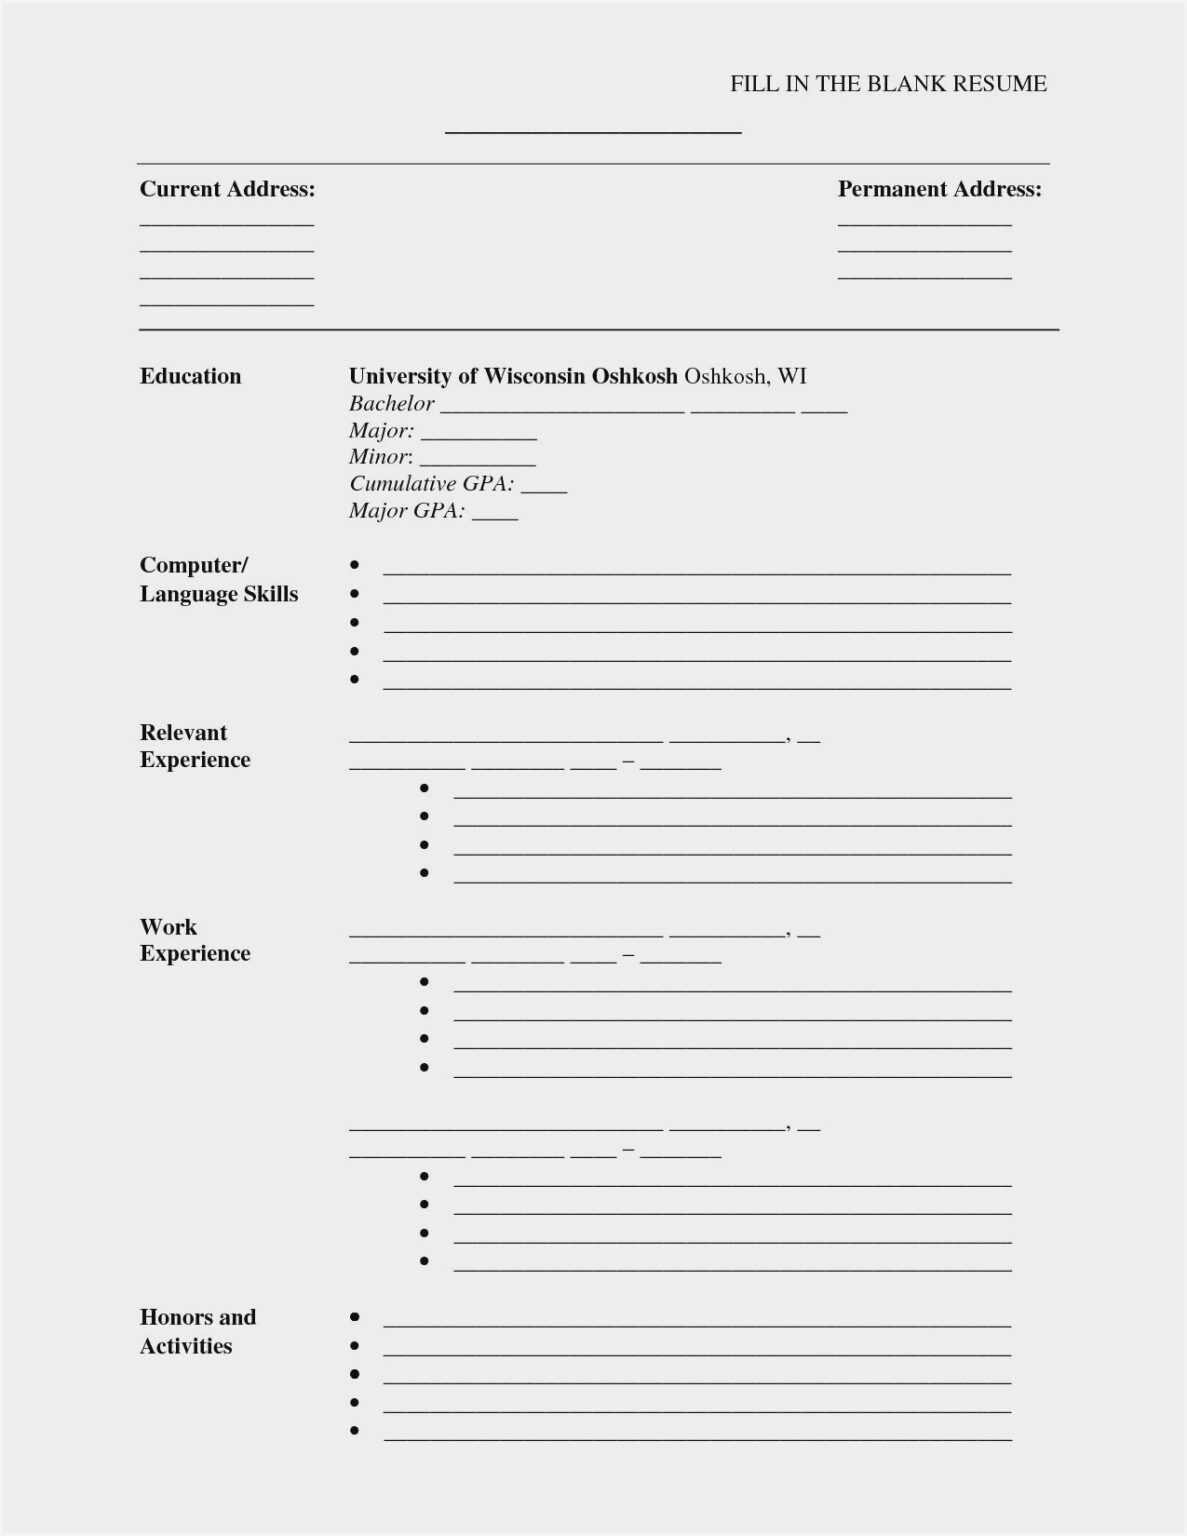 blank-resume-templates-for-microsoft-word-best-professional-templates